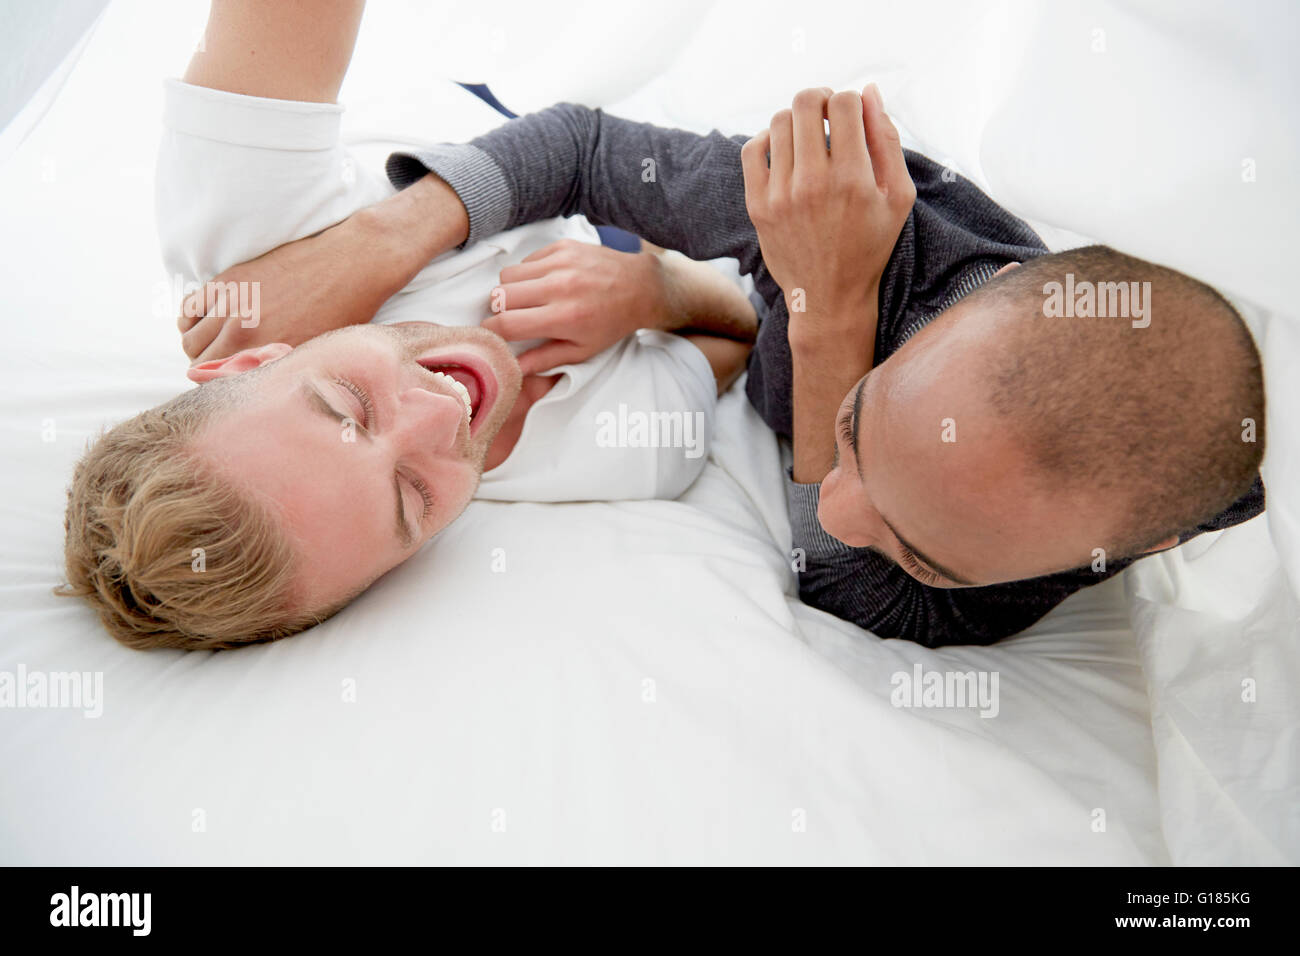 Homosexual couple fooling around on bed laughing Stock Photo